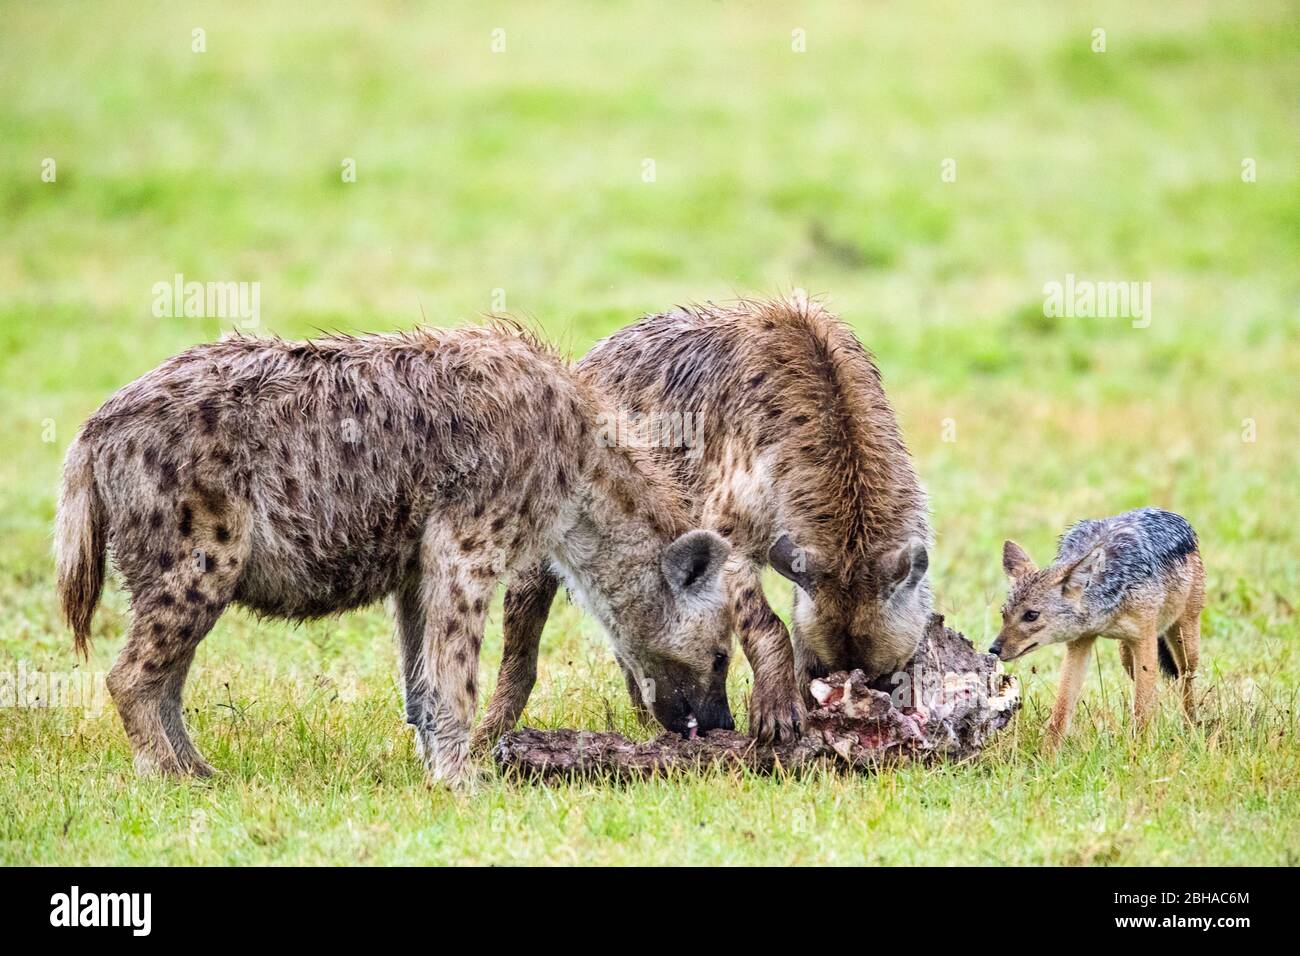 View of Spotted Hyena (Crocuta crocuta) family eating carrion, Ngorongoro Conservation Area, Tanzania, Africa Stock Photo